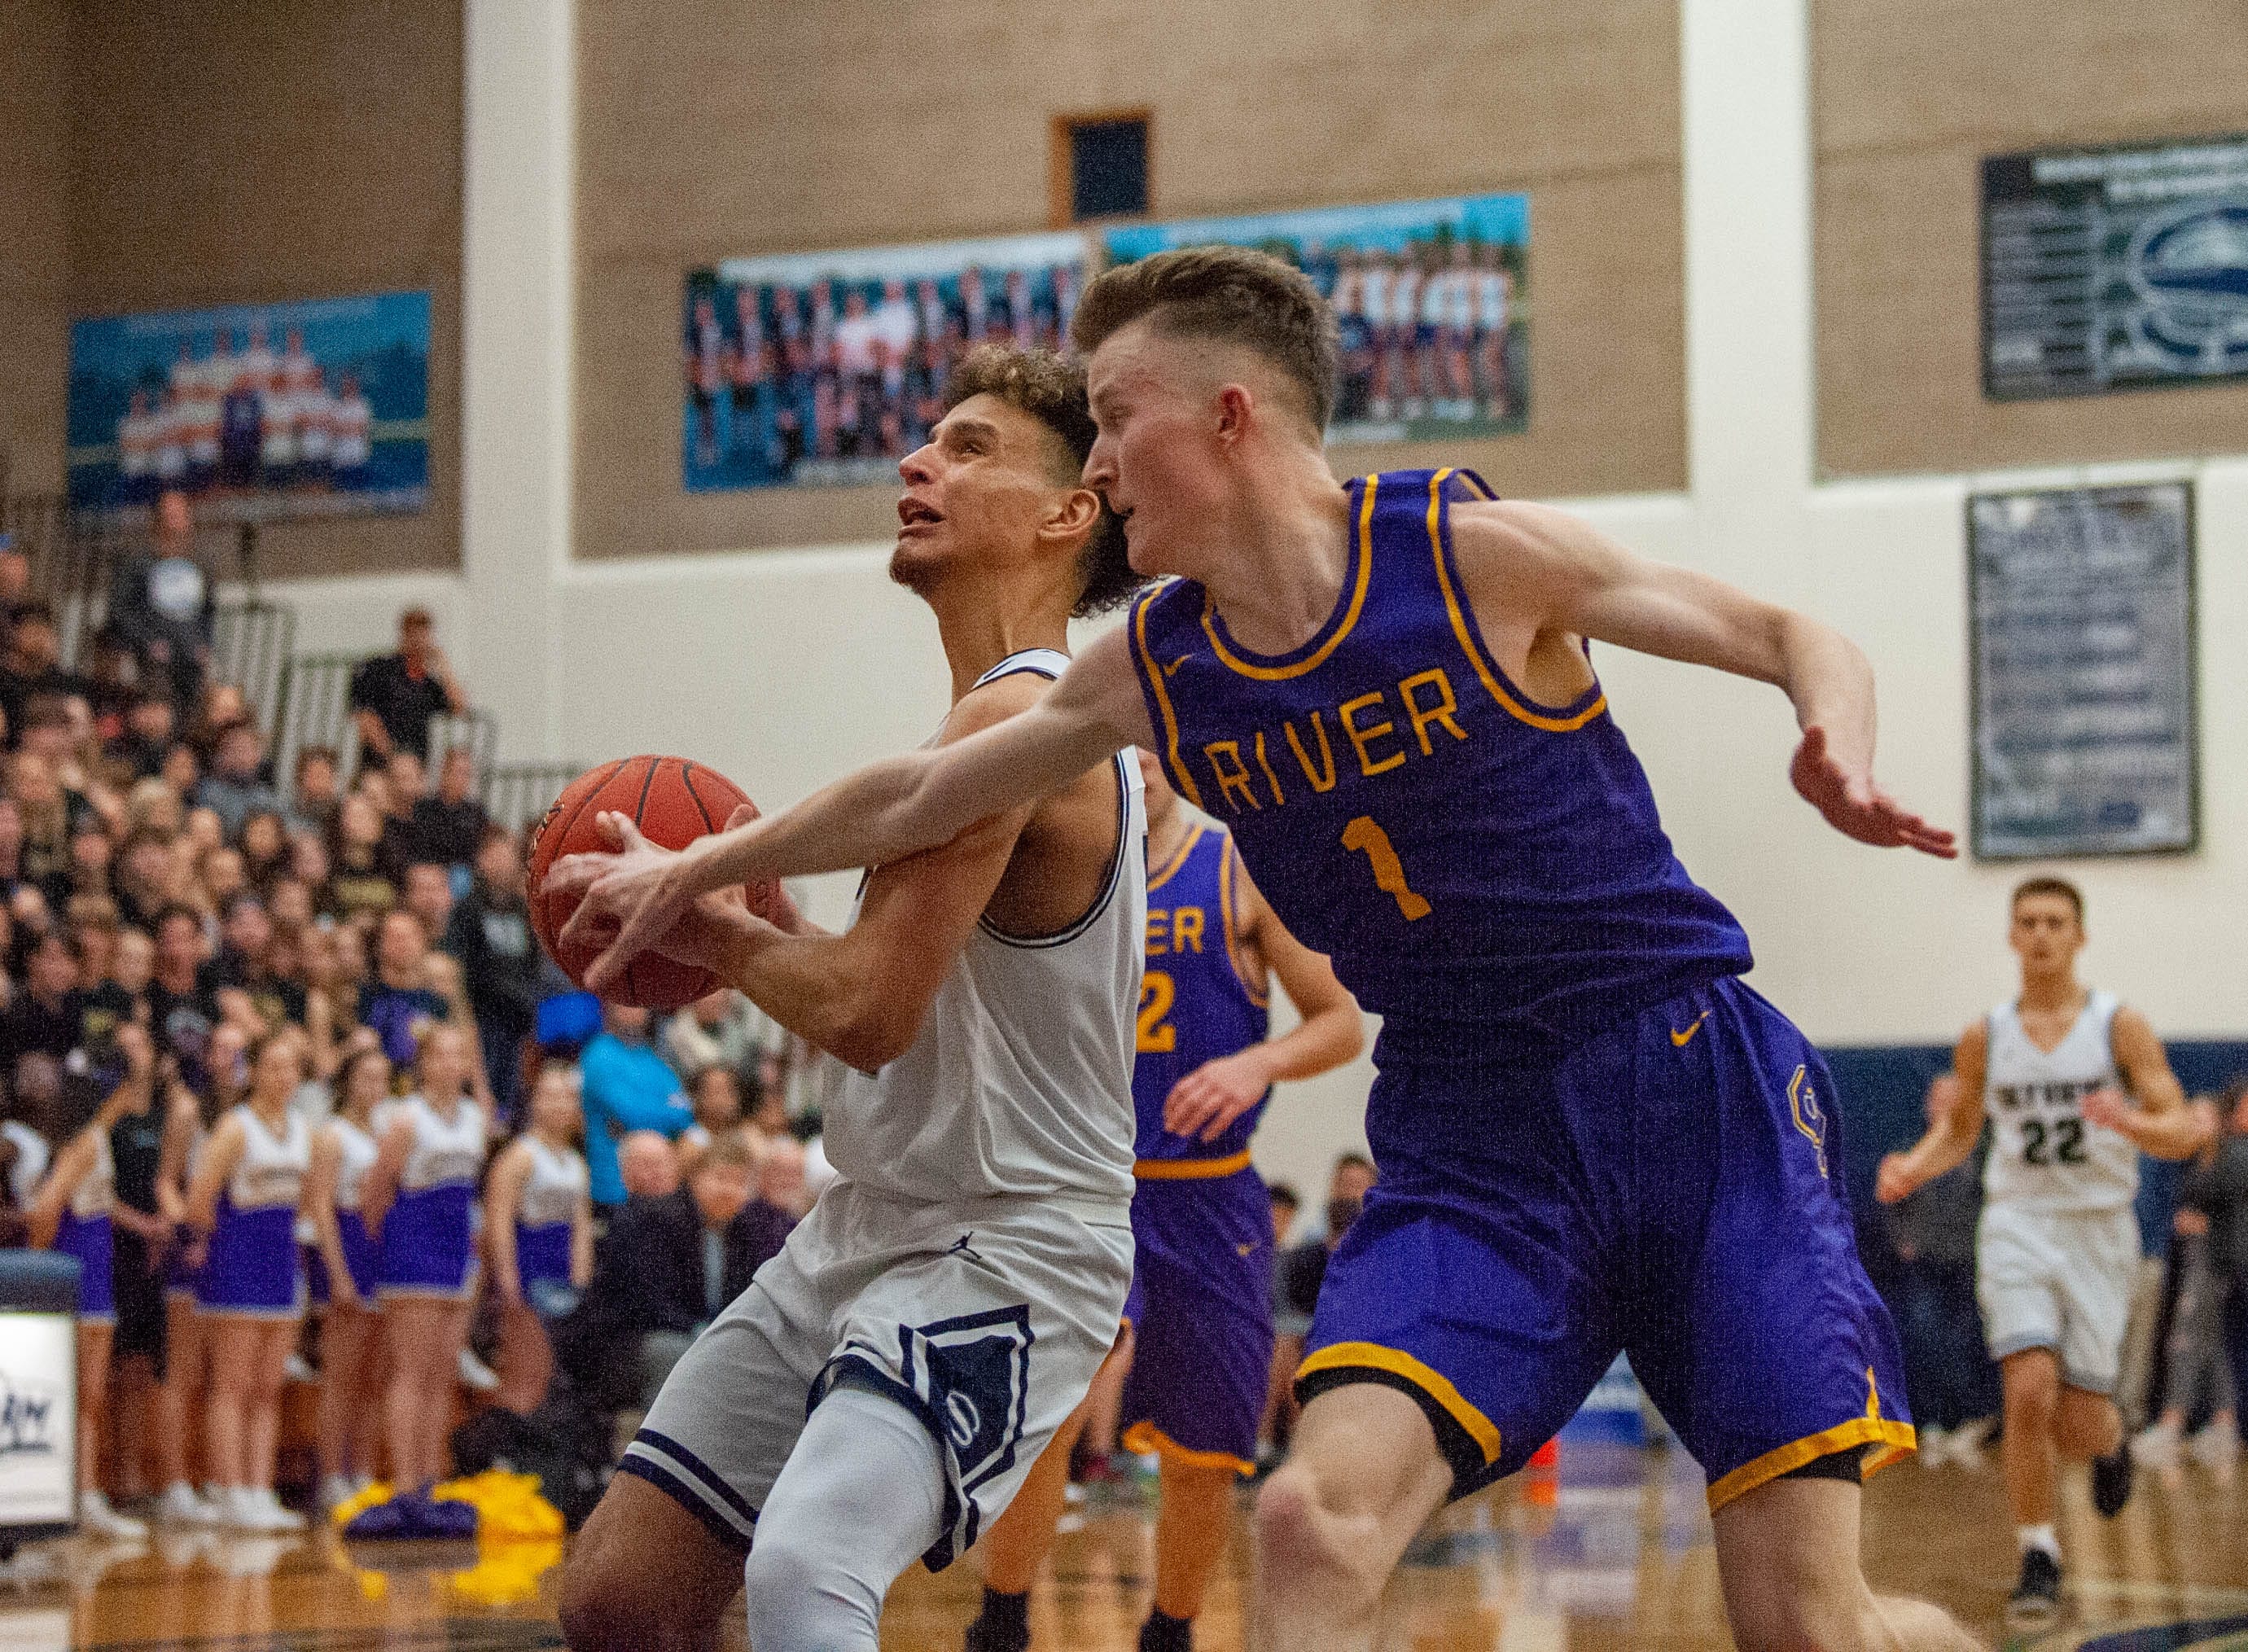 Skyview's Squeeky Johnson tries to evade Columbia River's Nate Snook on a fastbreak layup.